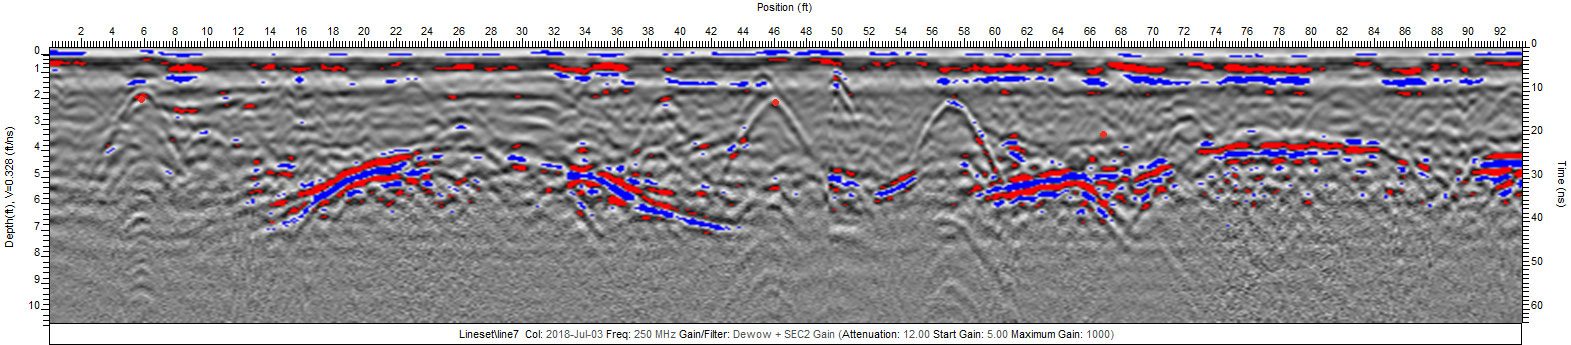 example of GPR data cross section - colored scheme